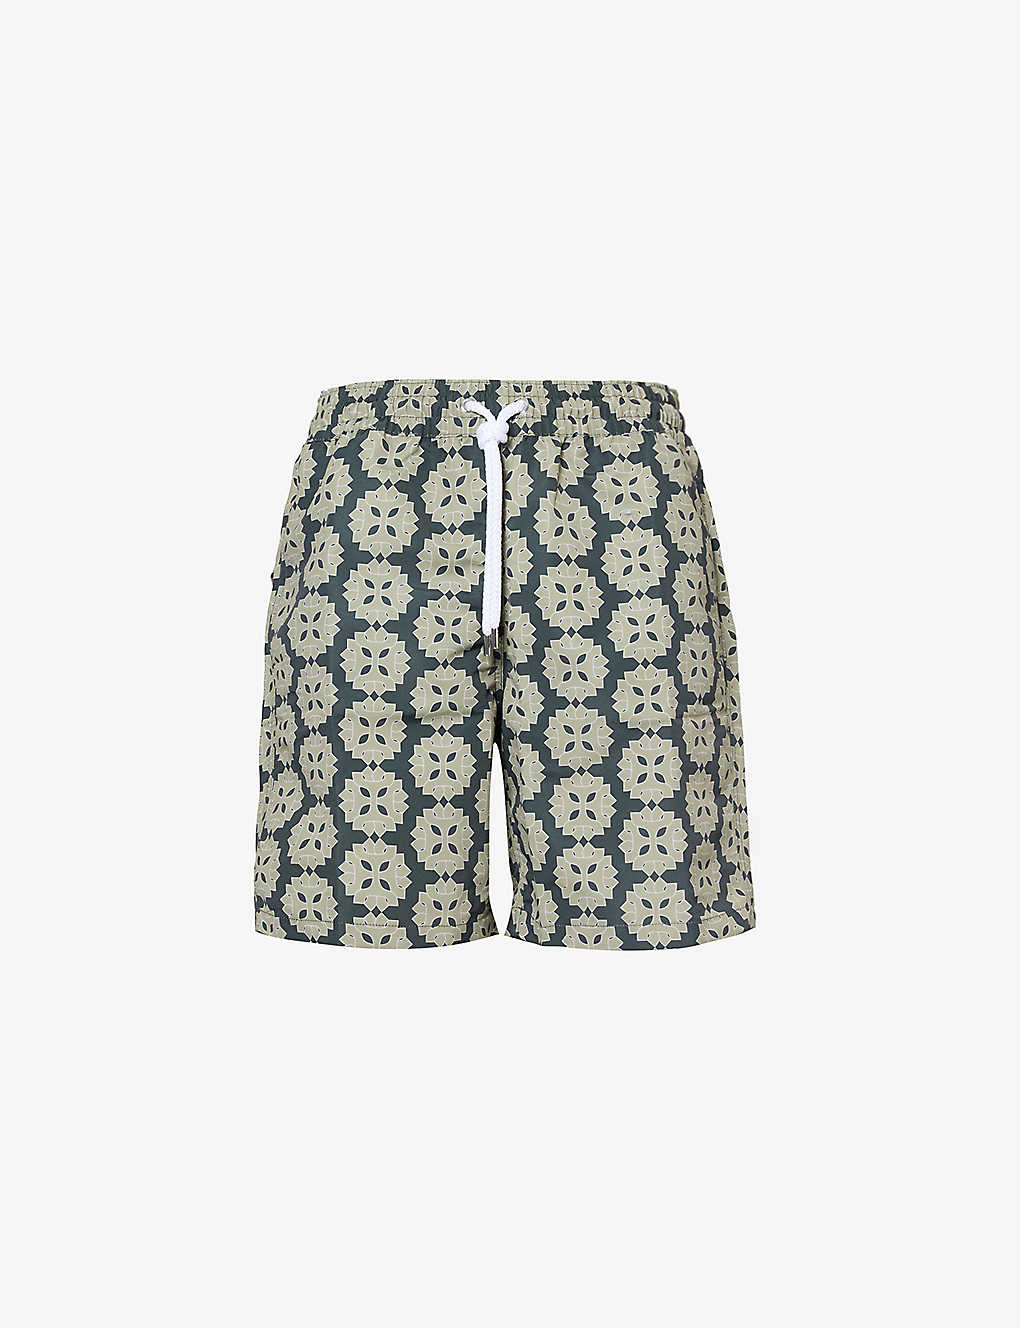 Frescobol Carioca Board Medalhao Recycled-polyester Swim Shorts In Multi-coloured